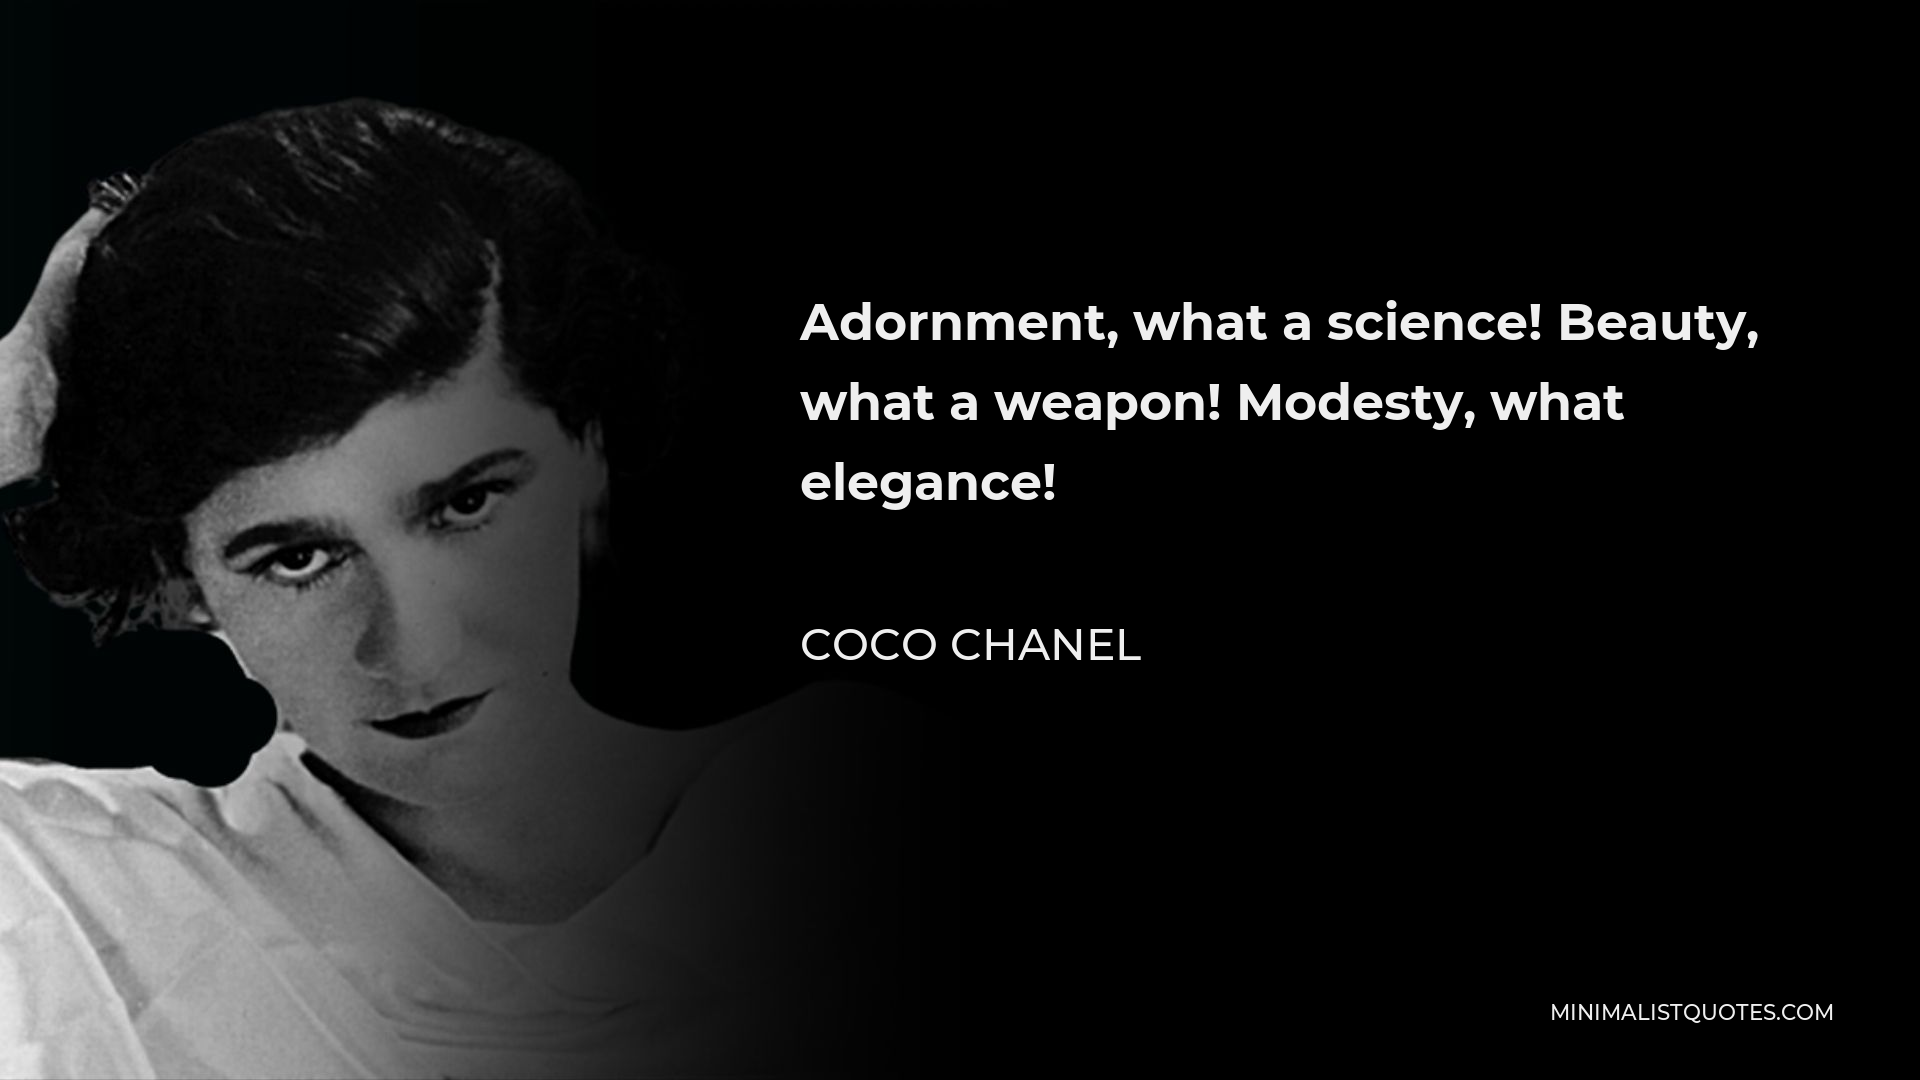 Coco Chanel Quote - Adornment, what a science! Beauty, what a weapon! Modesty, what elegance!